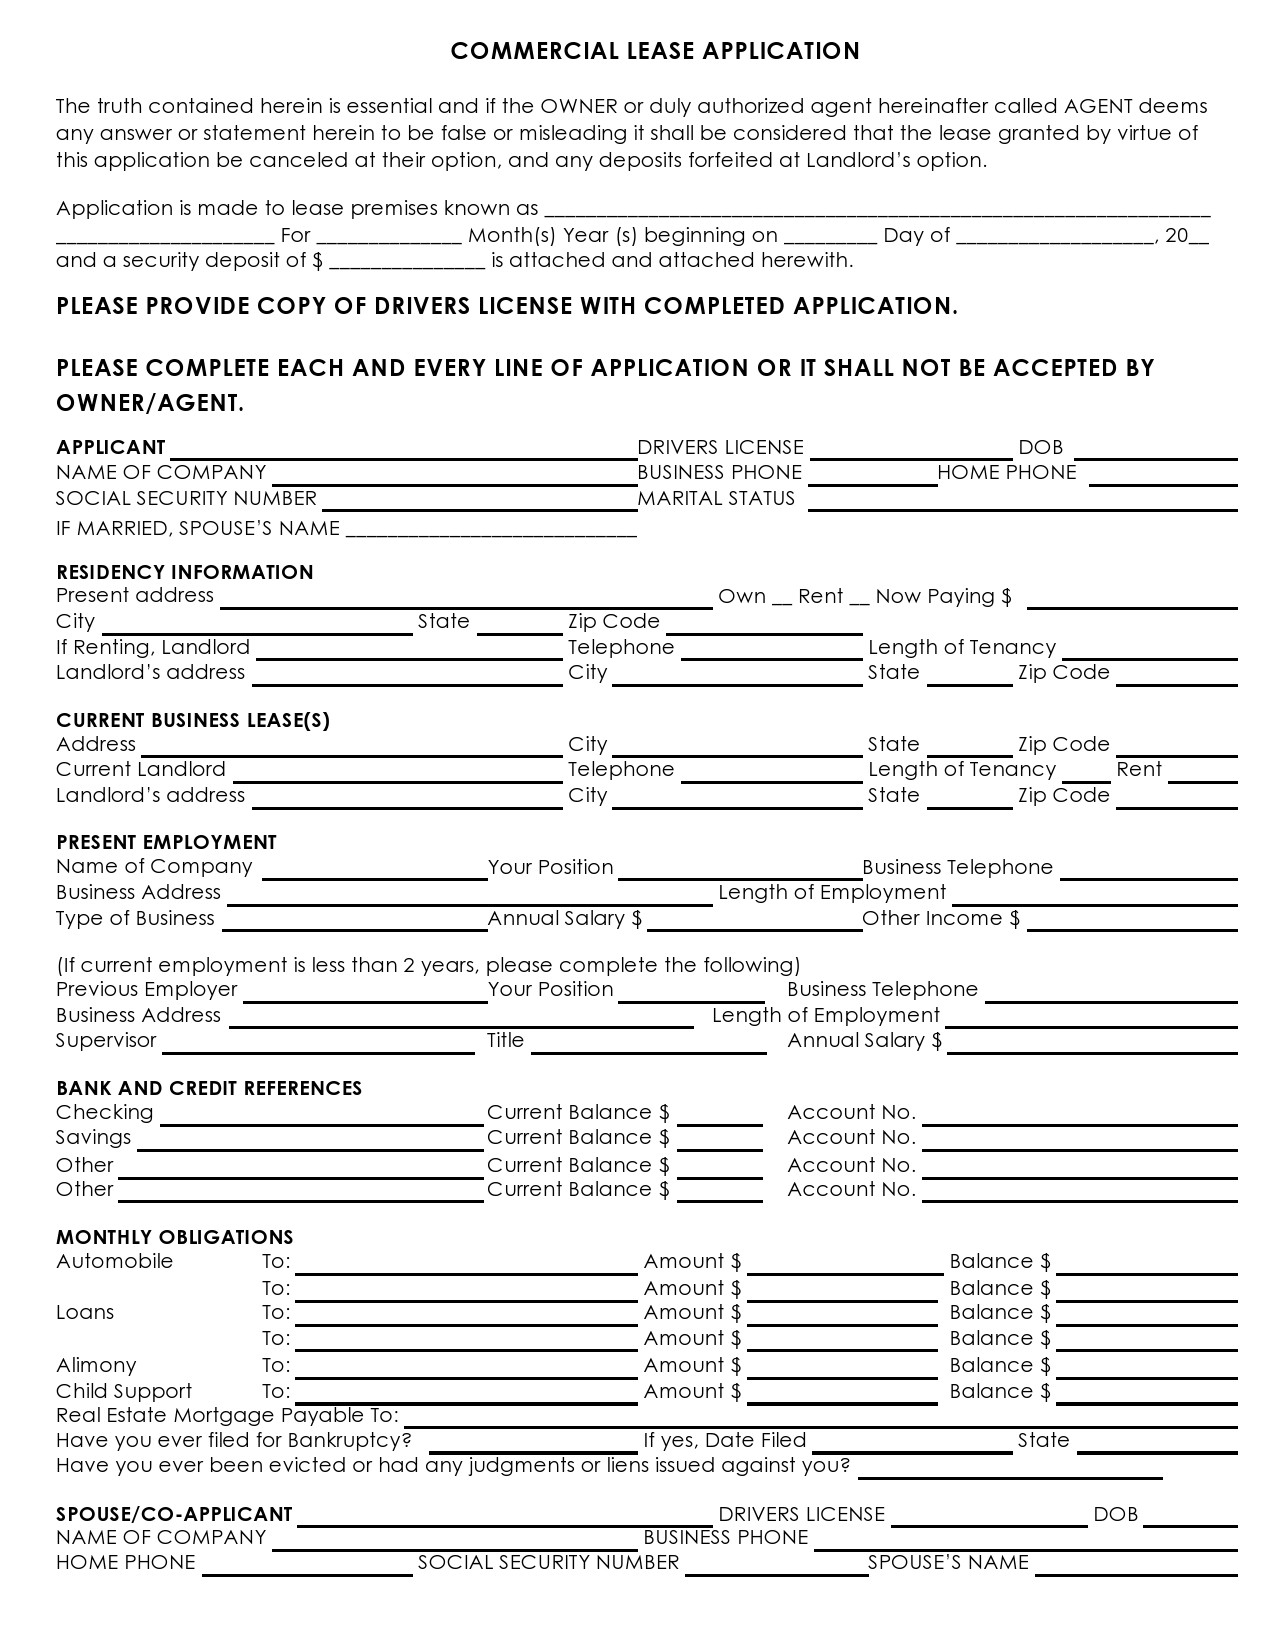 Free commercial lease application 22